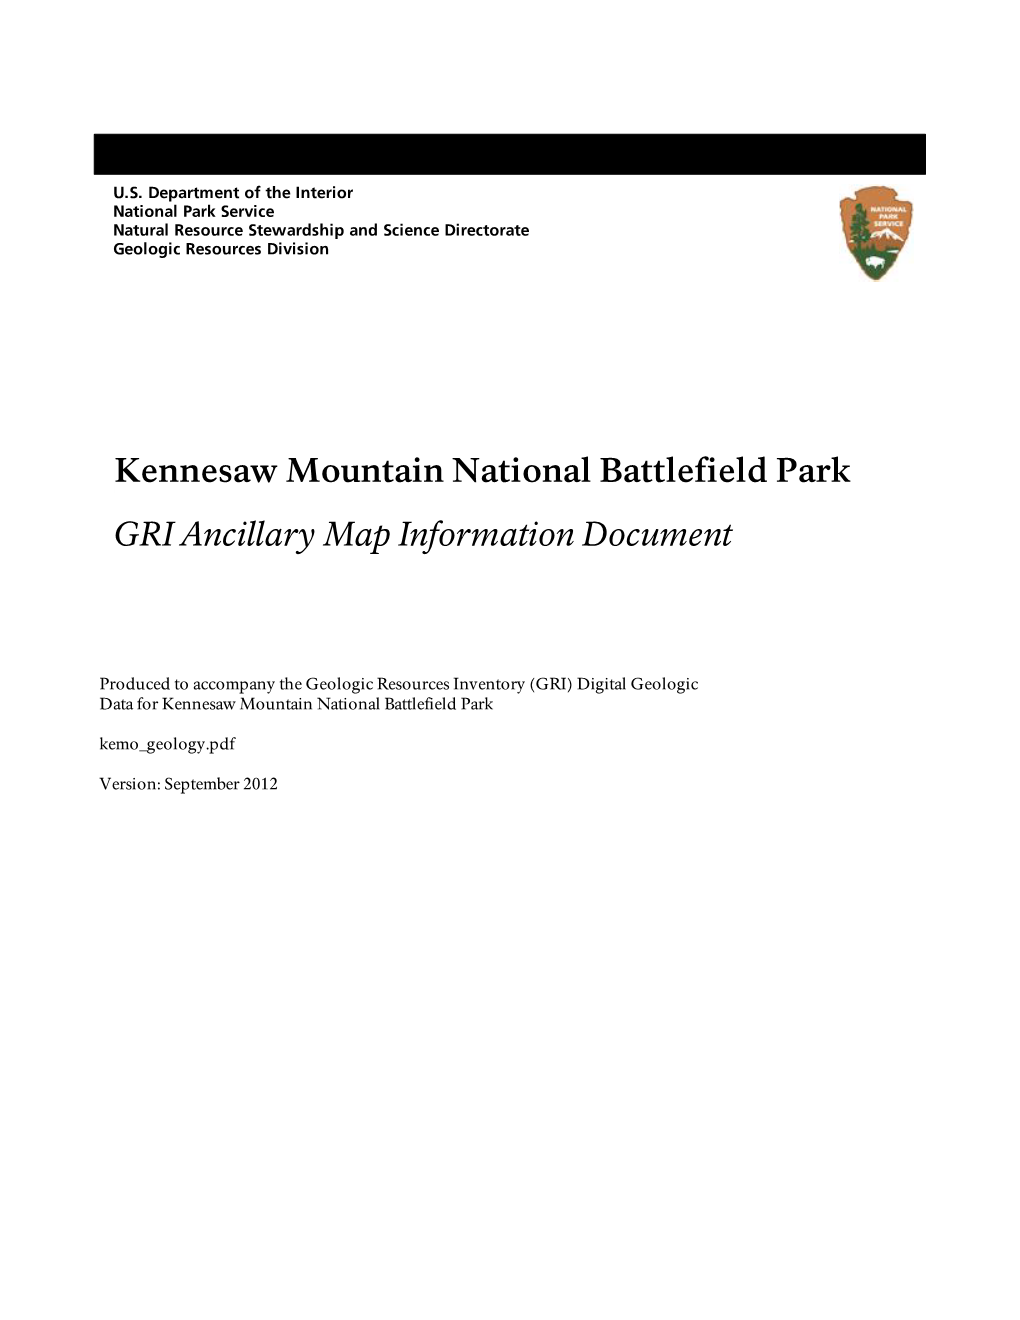 Geologic Resources Inventory Map Document for Kennesaw Mountain National Battlefield Park